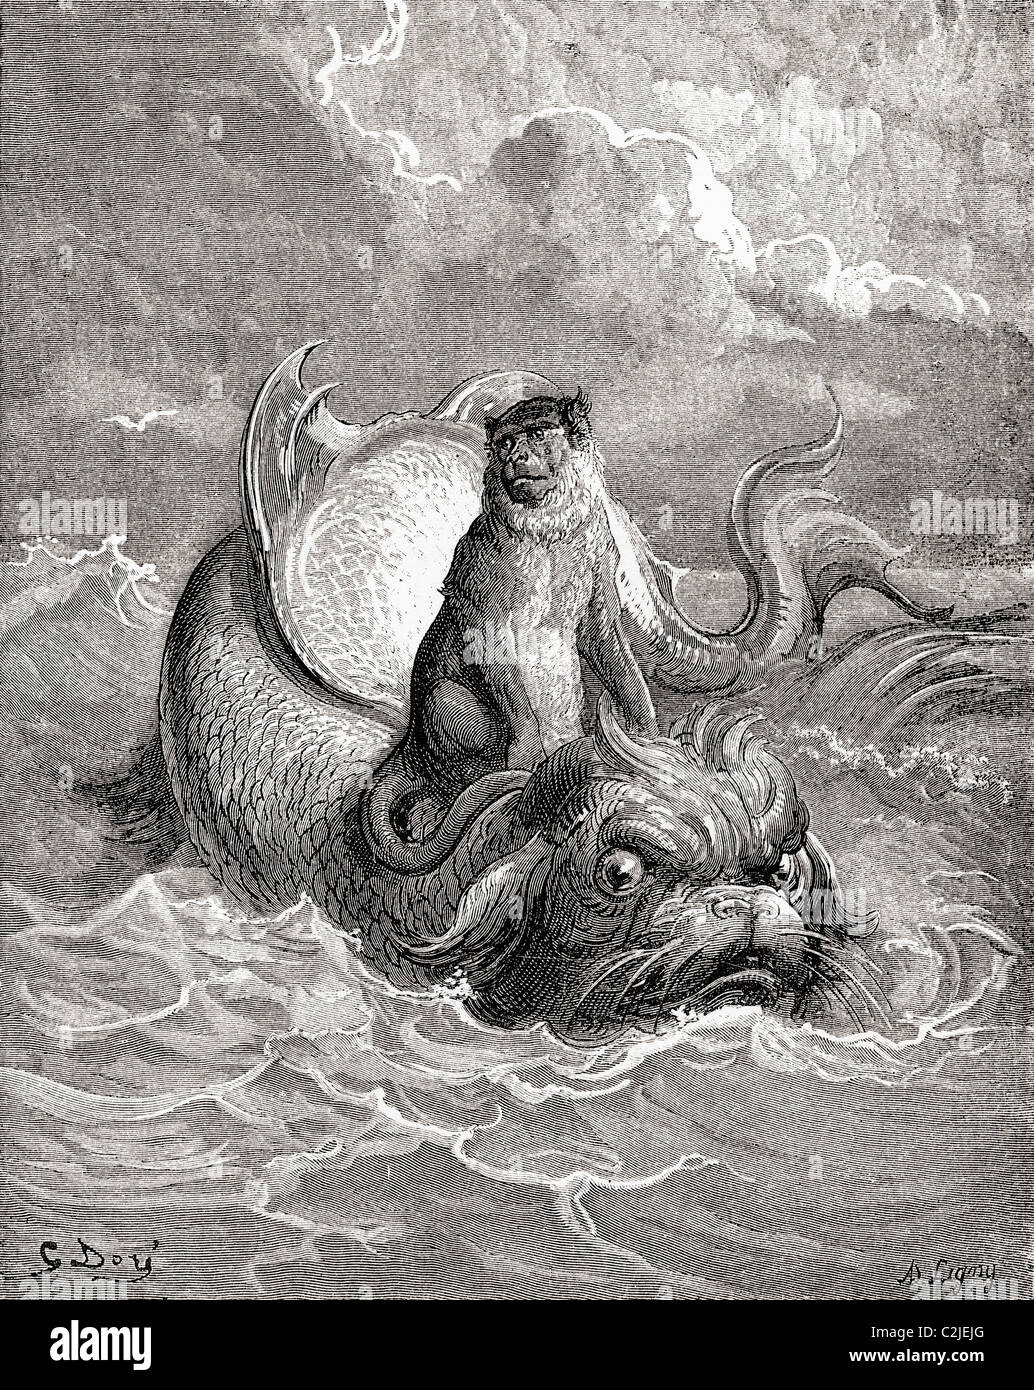 The Monkey and The Dolphin after a work by Gustave Dore for a La Fontaine fable. Stock Photo